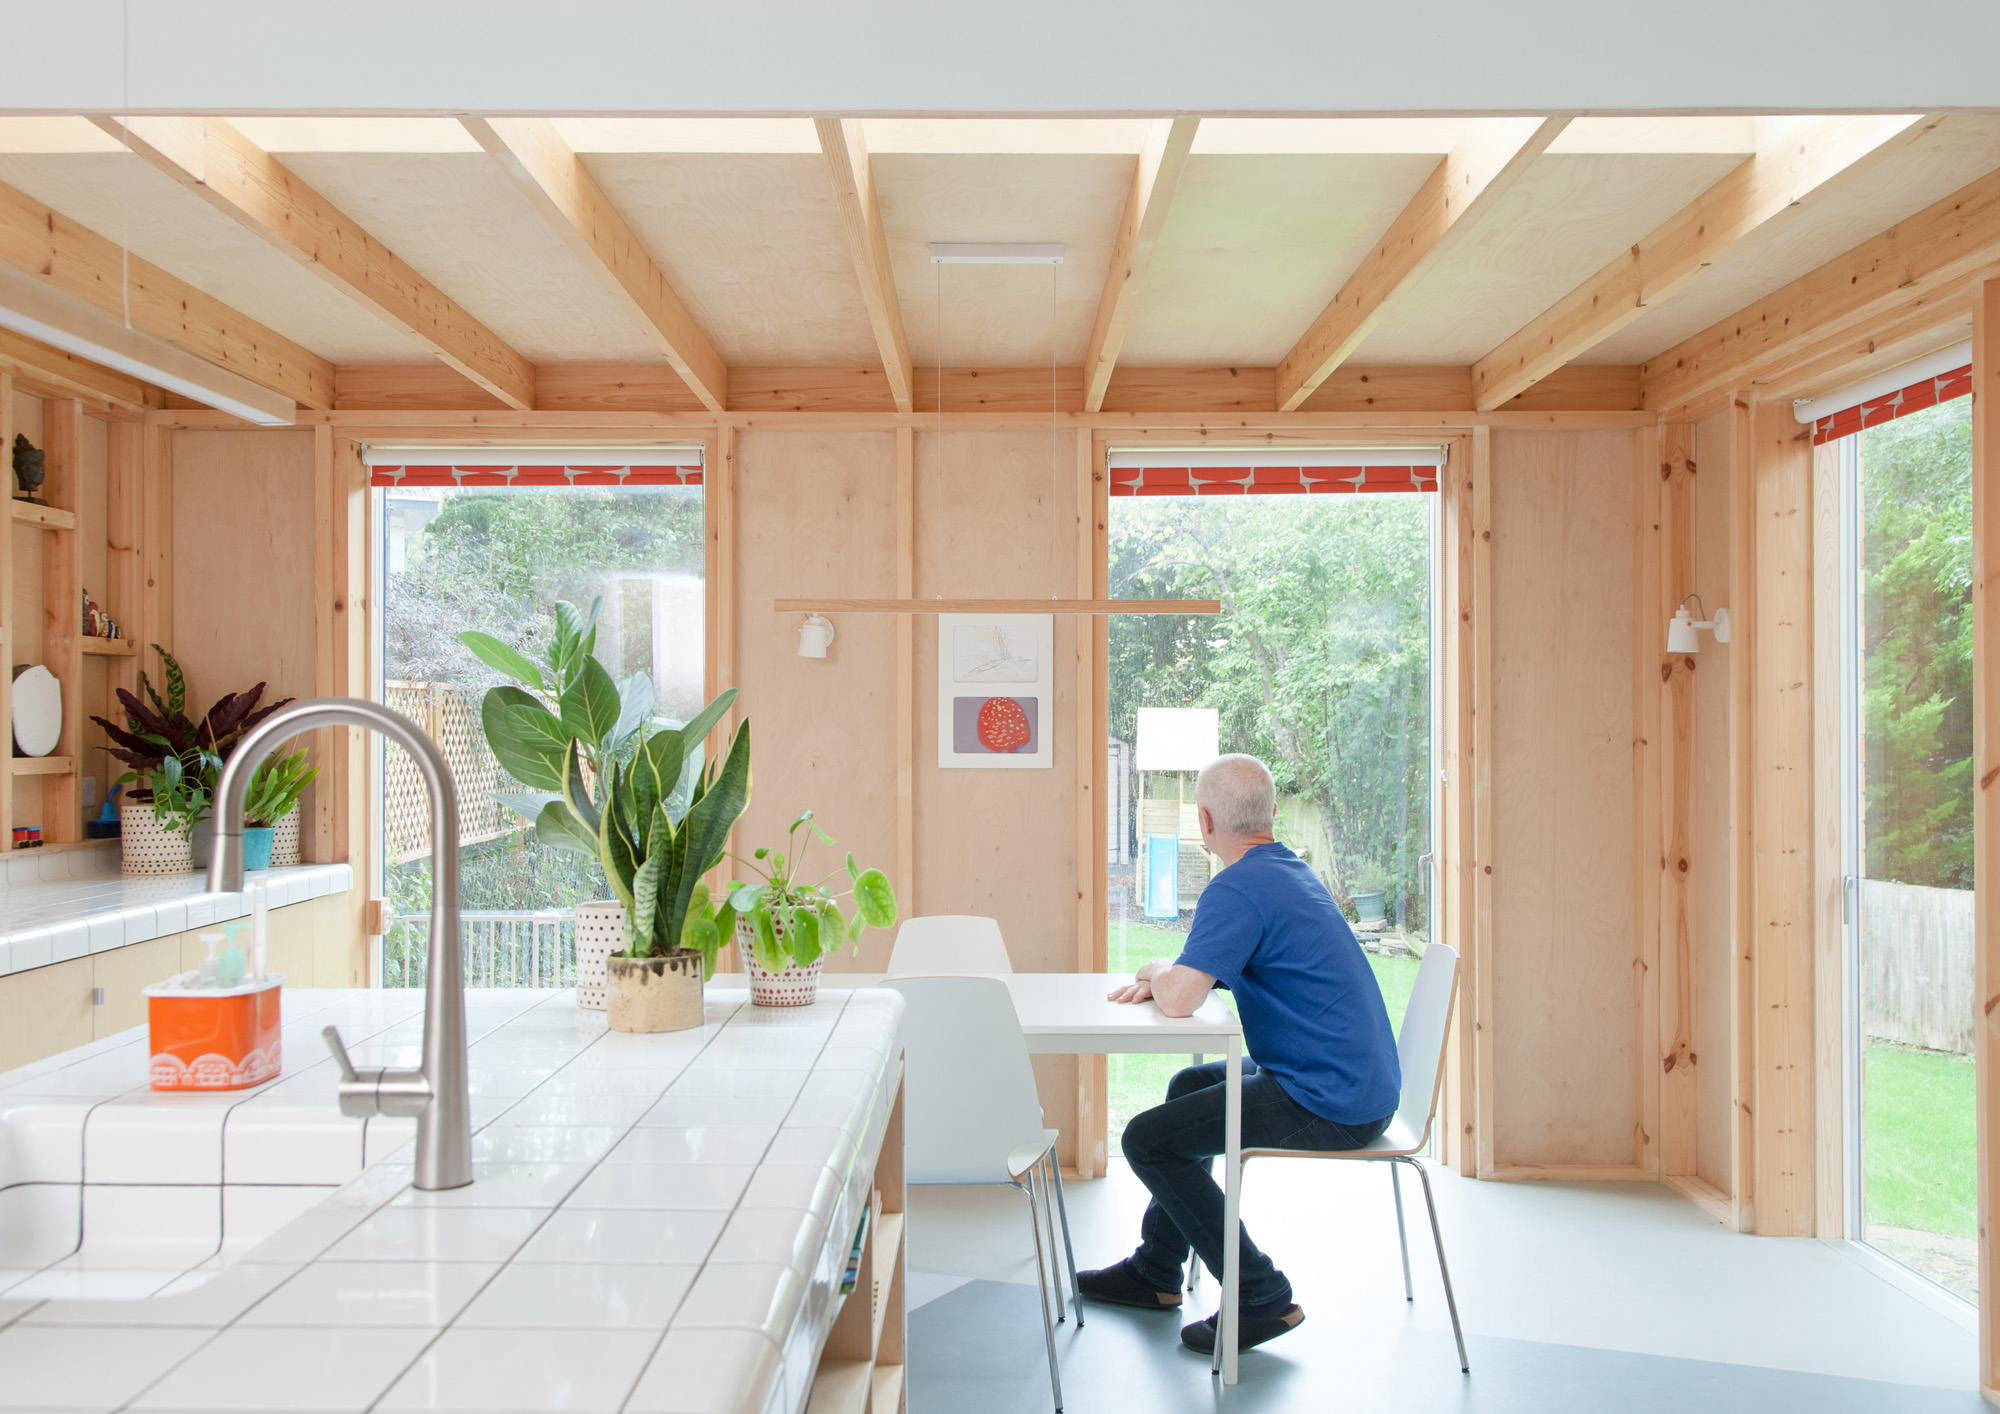 Living space in Fruit Box by Nintim Architects - contemporary architecture design studio in London